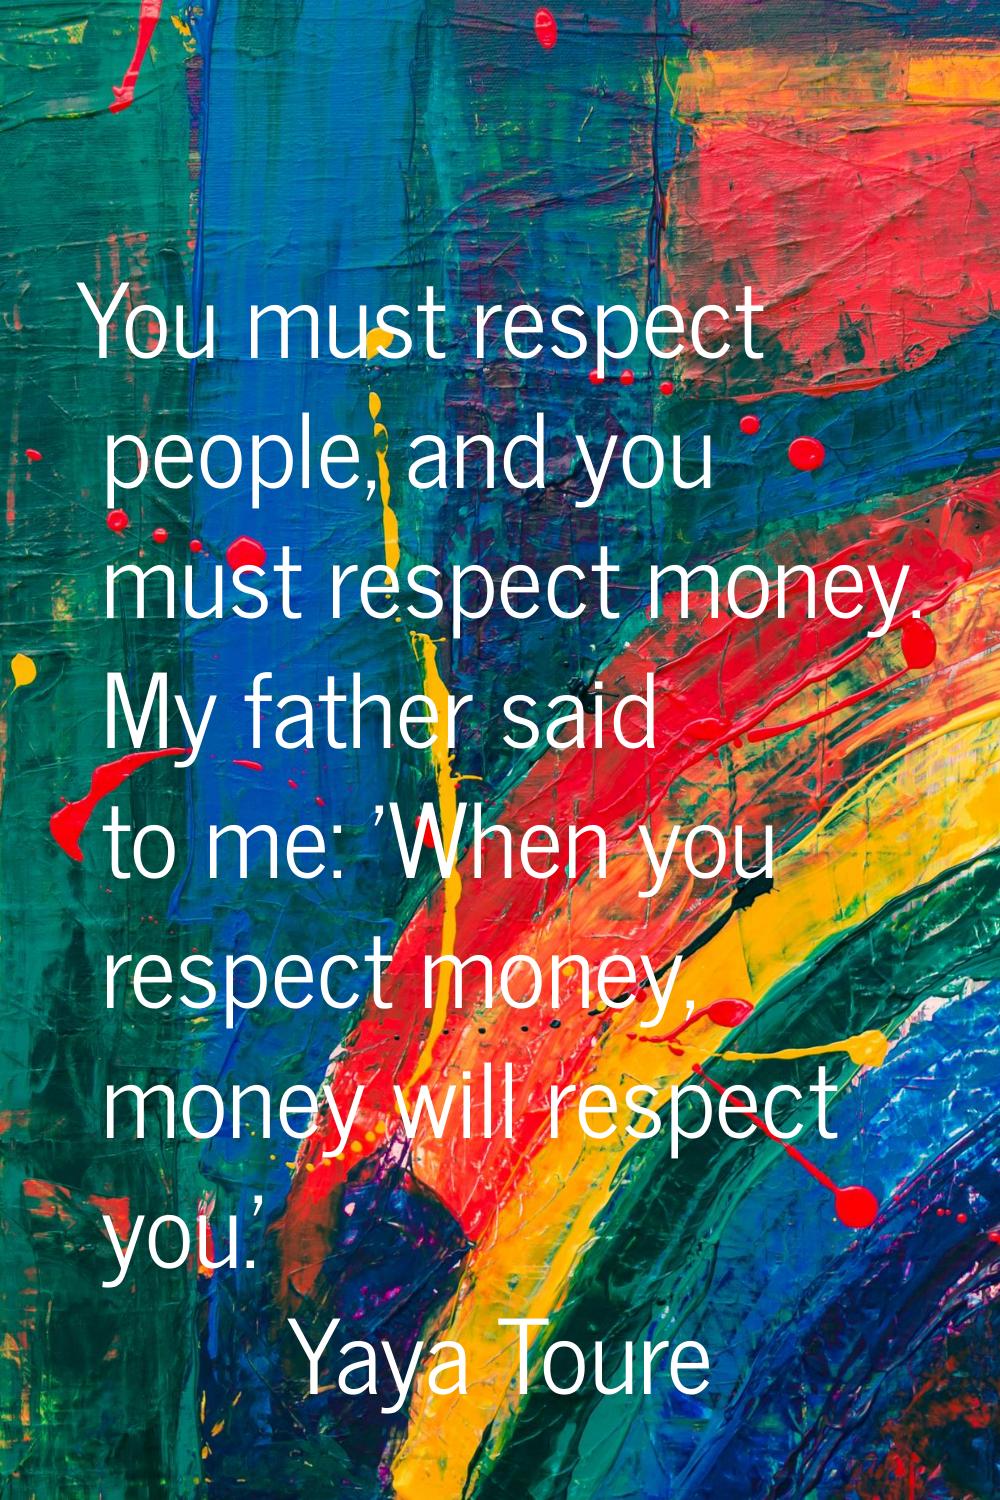 You must respect people, and you must respect money. My father said to me: 'When you respect money,